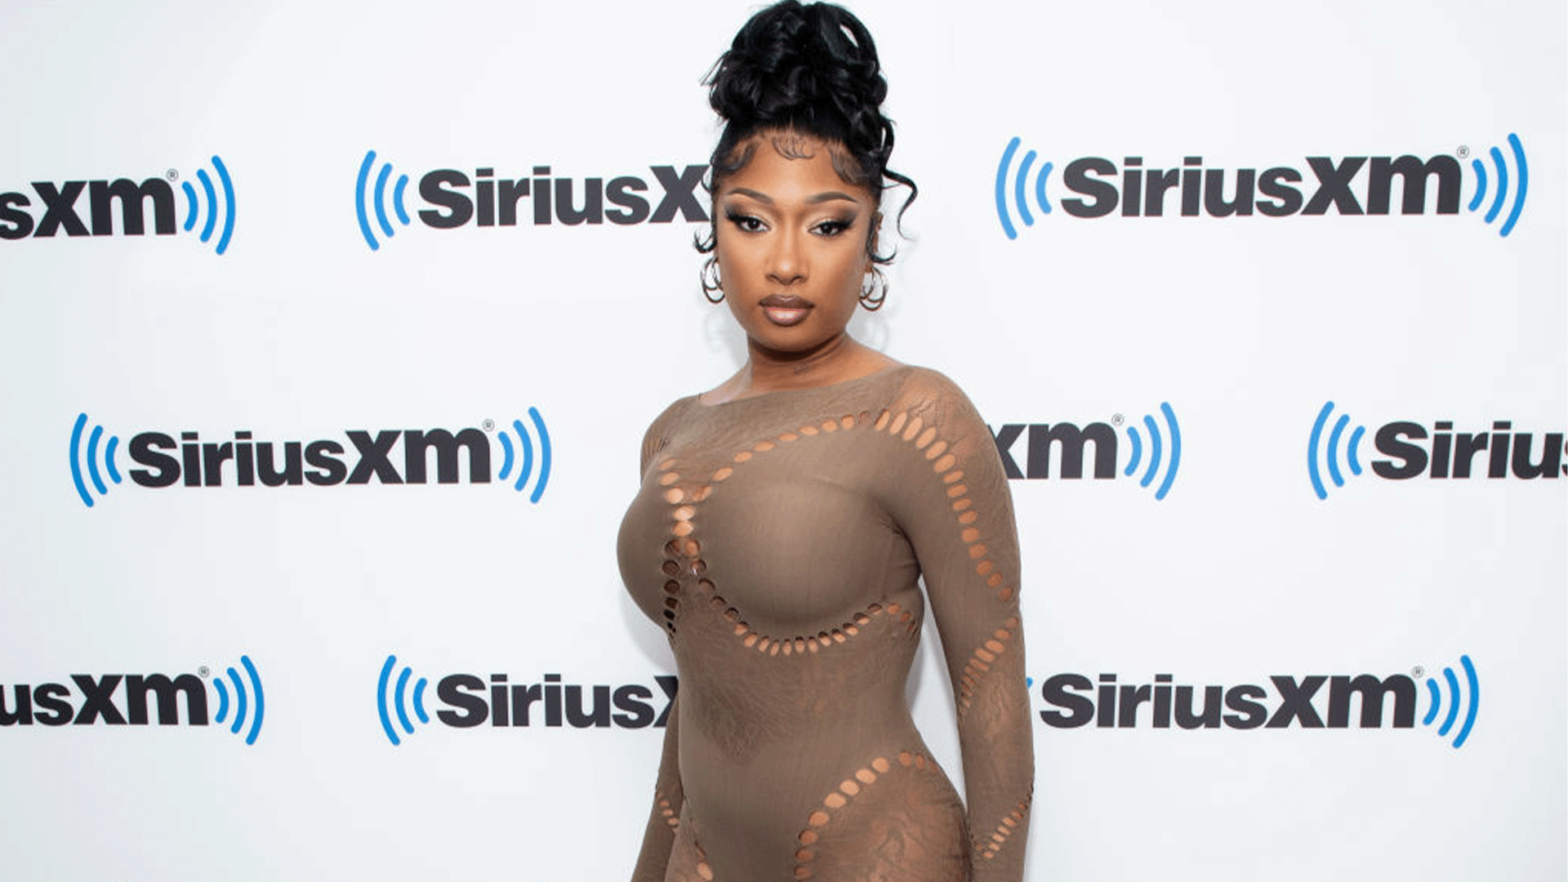 Megan Thee Stallion Requests For At Least $1M In Damages In Ongoing Legal Battle With 1501 Certified Entertainment